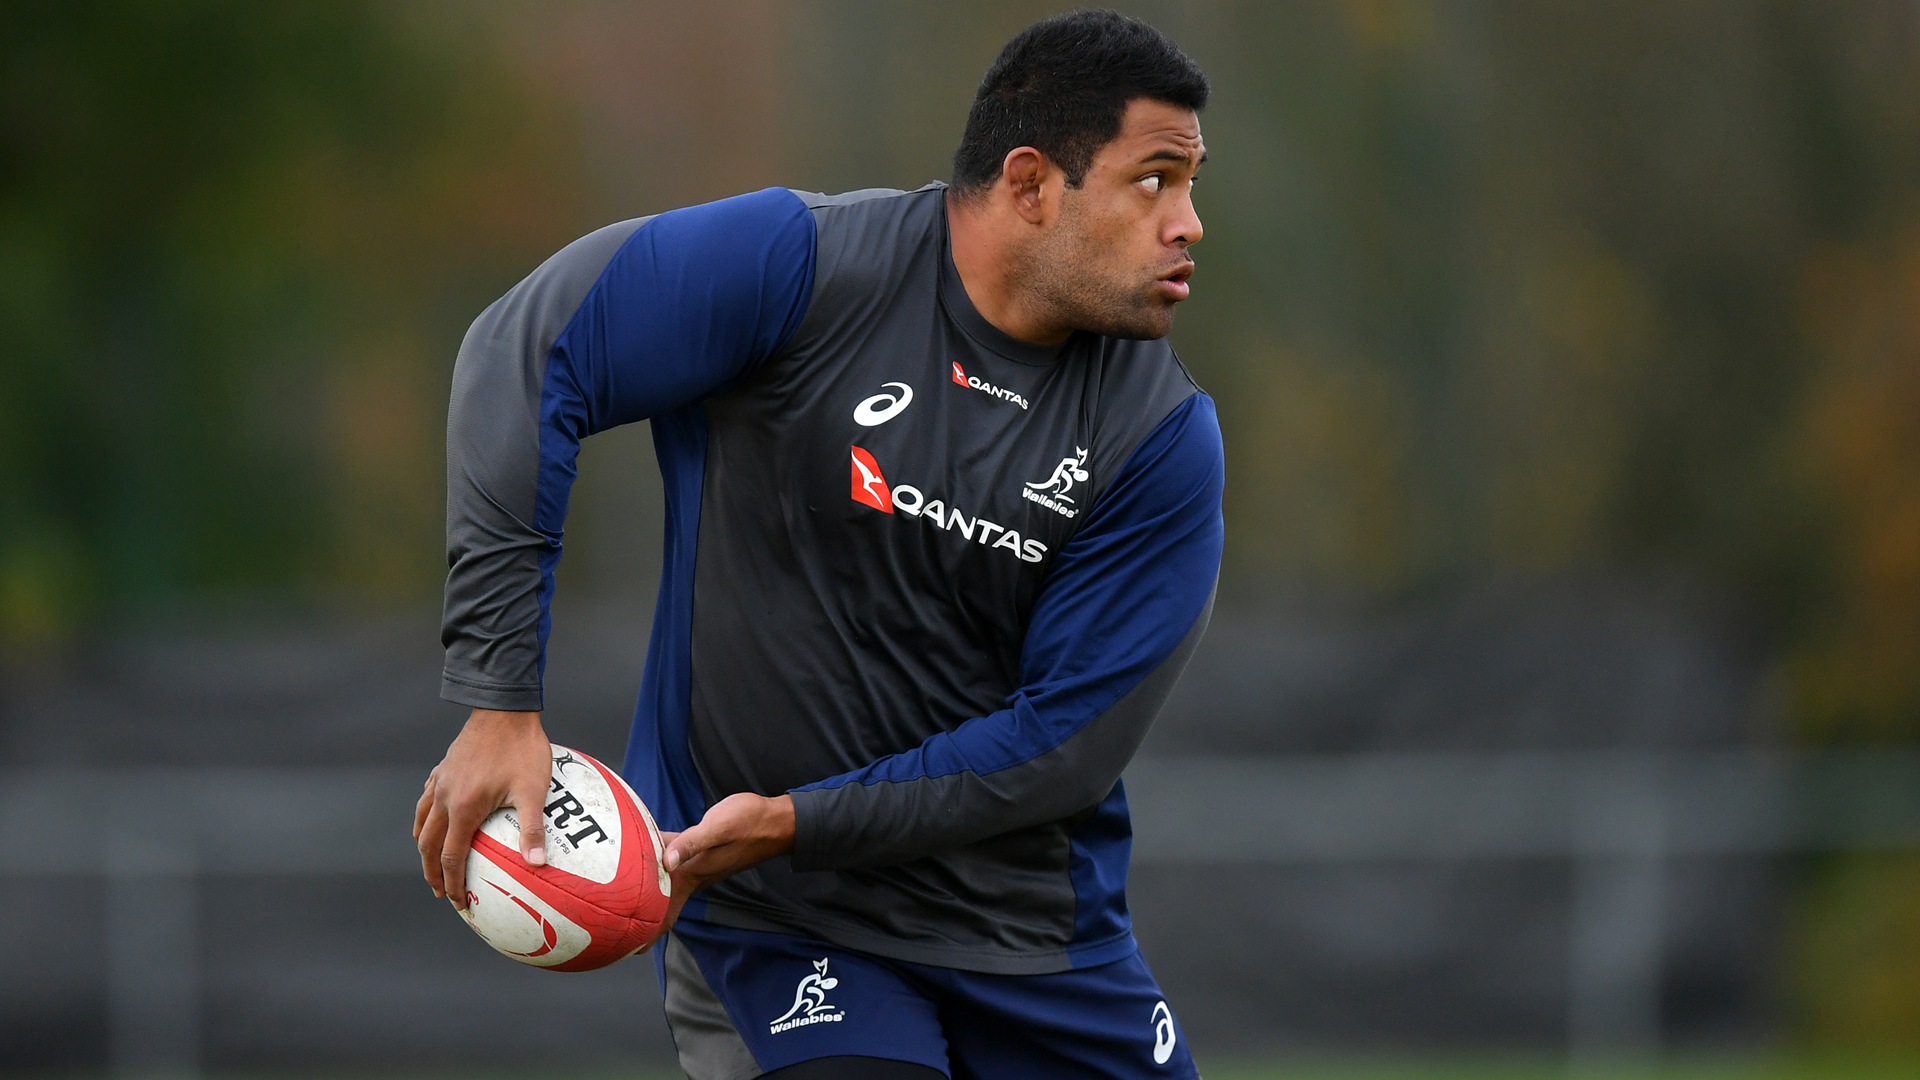 Scott Sio signed a deal with the Wallabies and Brumbies until at least the end of 2022.